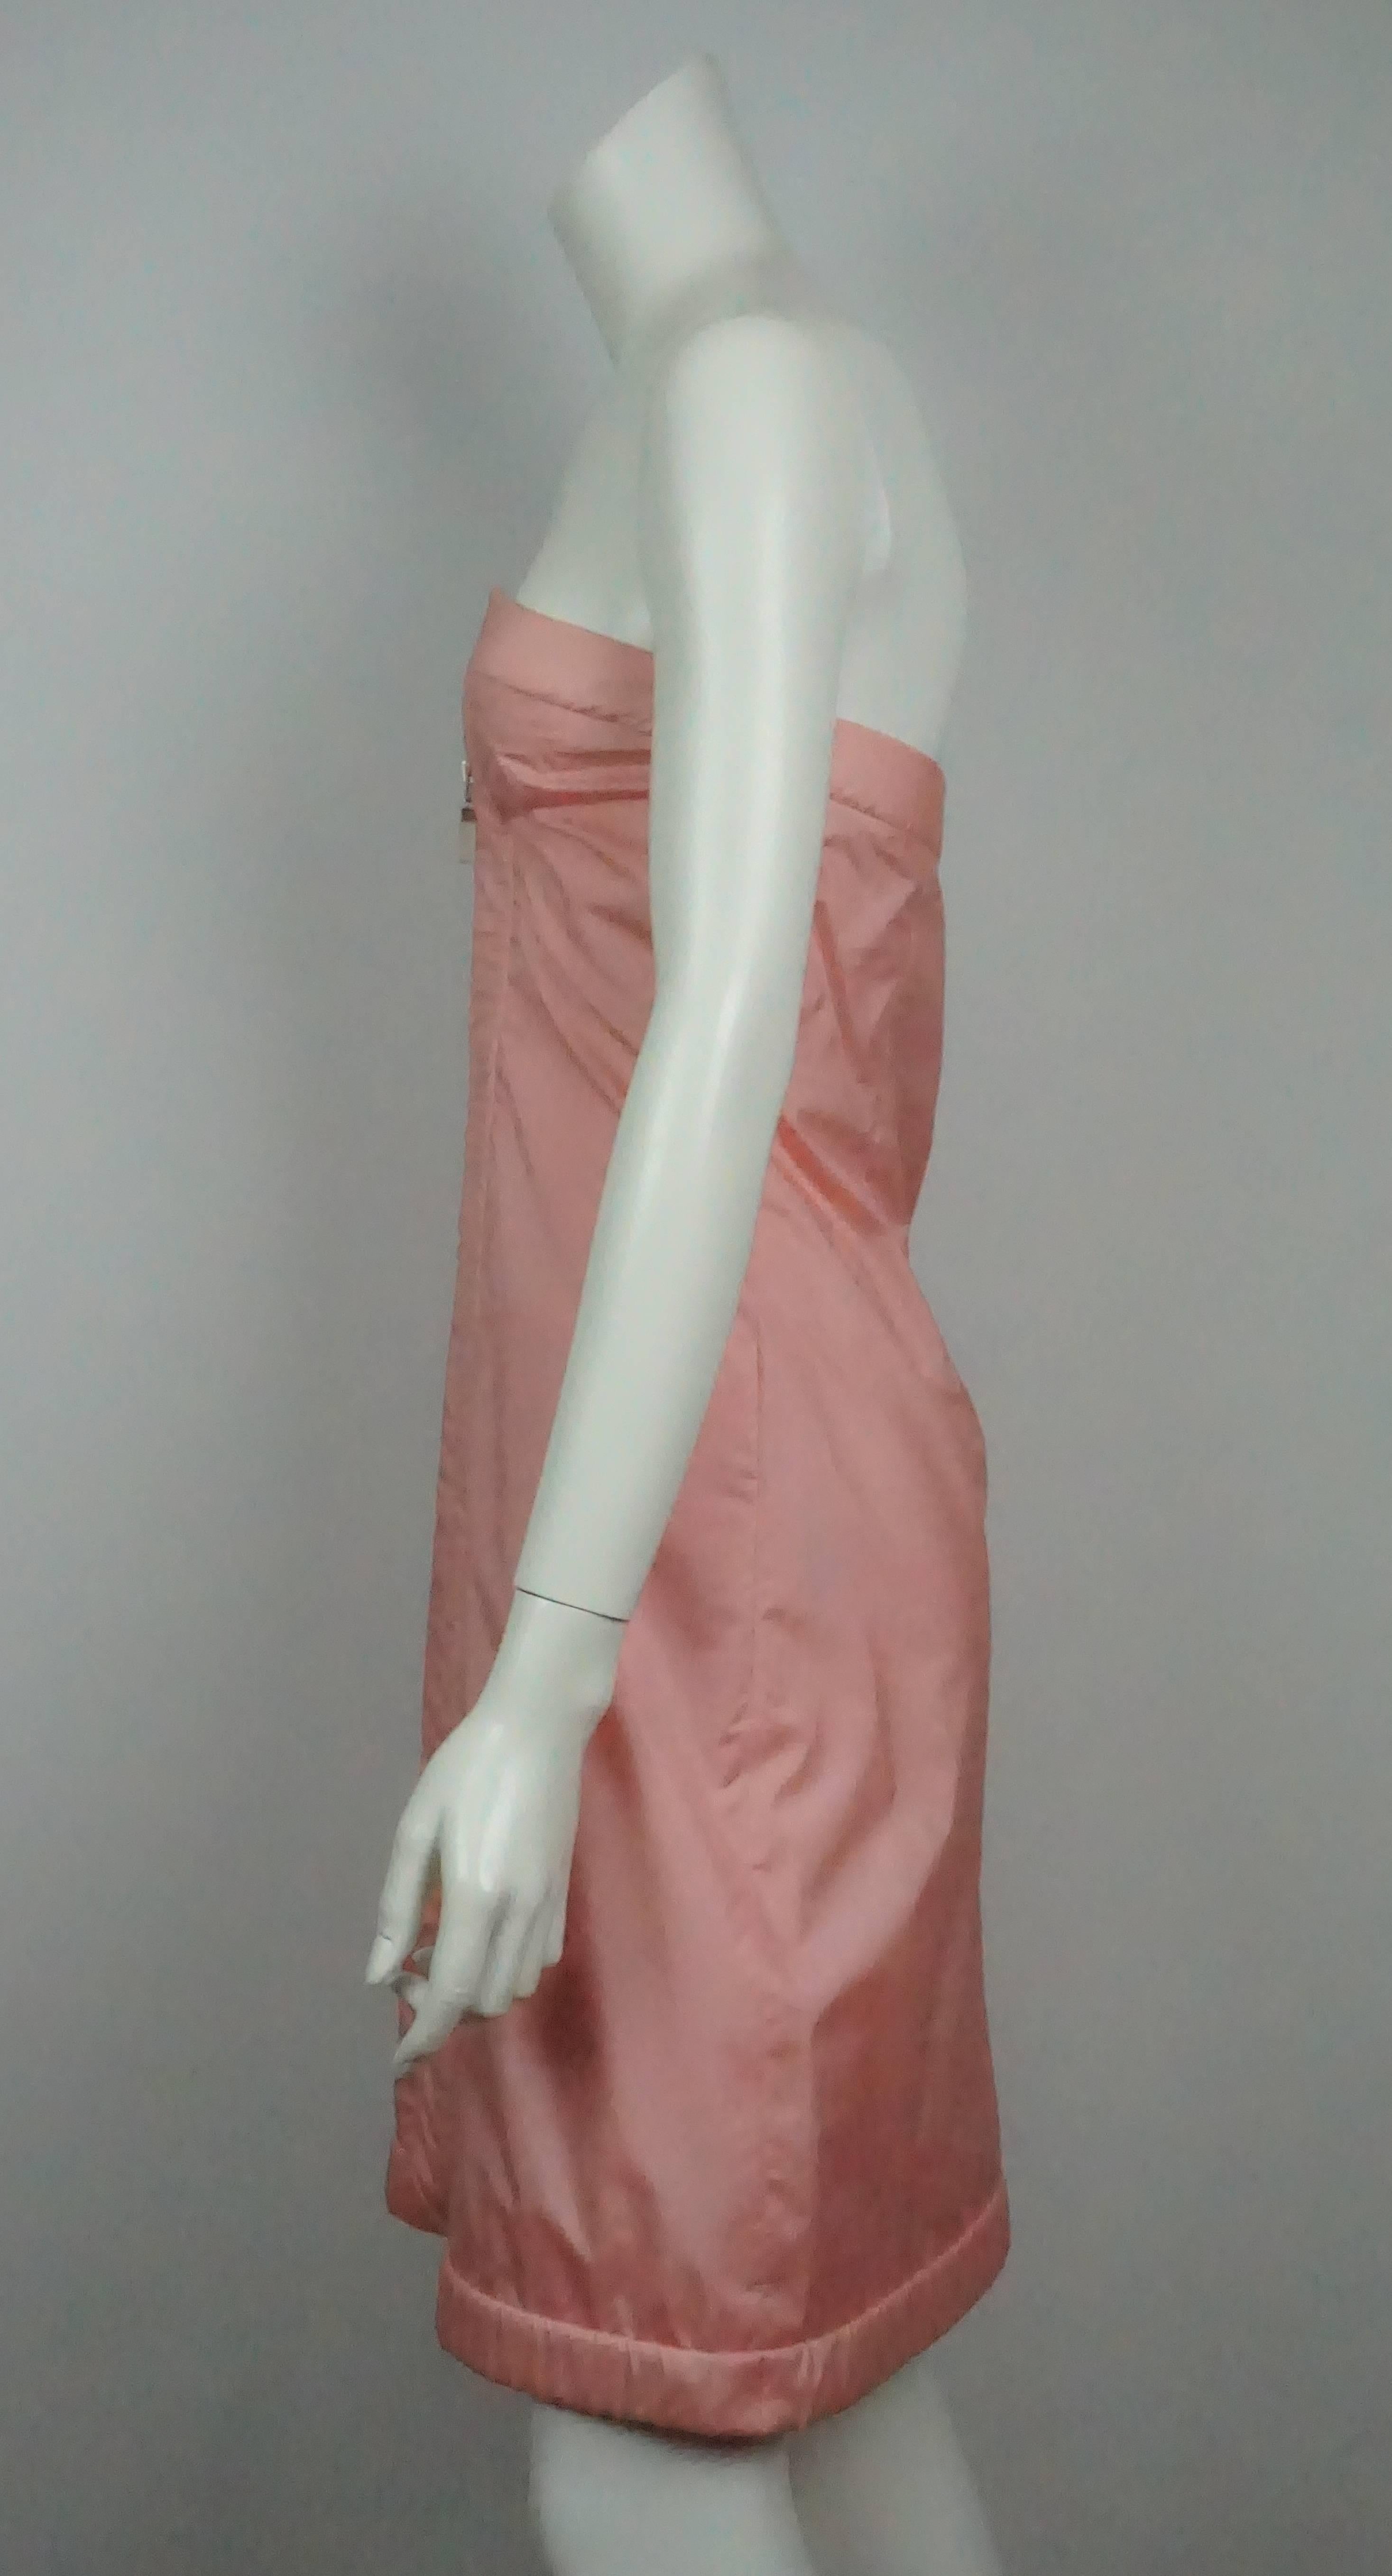 Givenchy Couture Pink Parachute Silk Strapless Dress - 38 - Circa 80's  This spectacular couture Givenchy 80's dress is made of a very unique silk parachute like material. It is strapless with a front clear nylon zipper that zips on both ends and